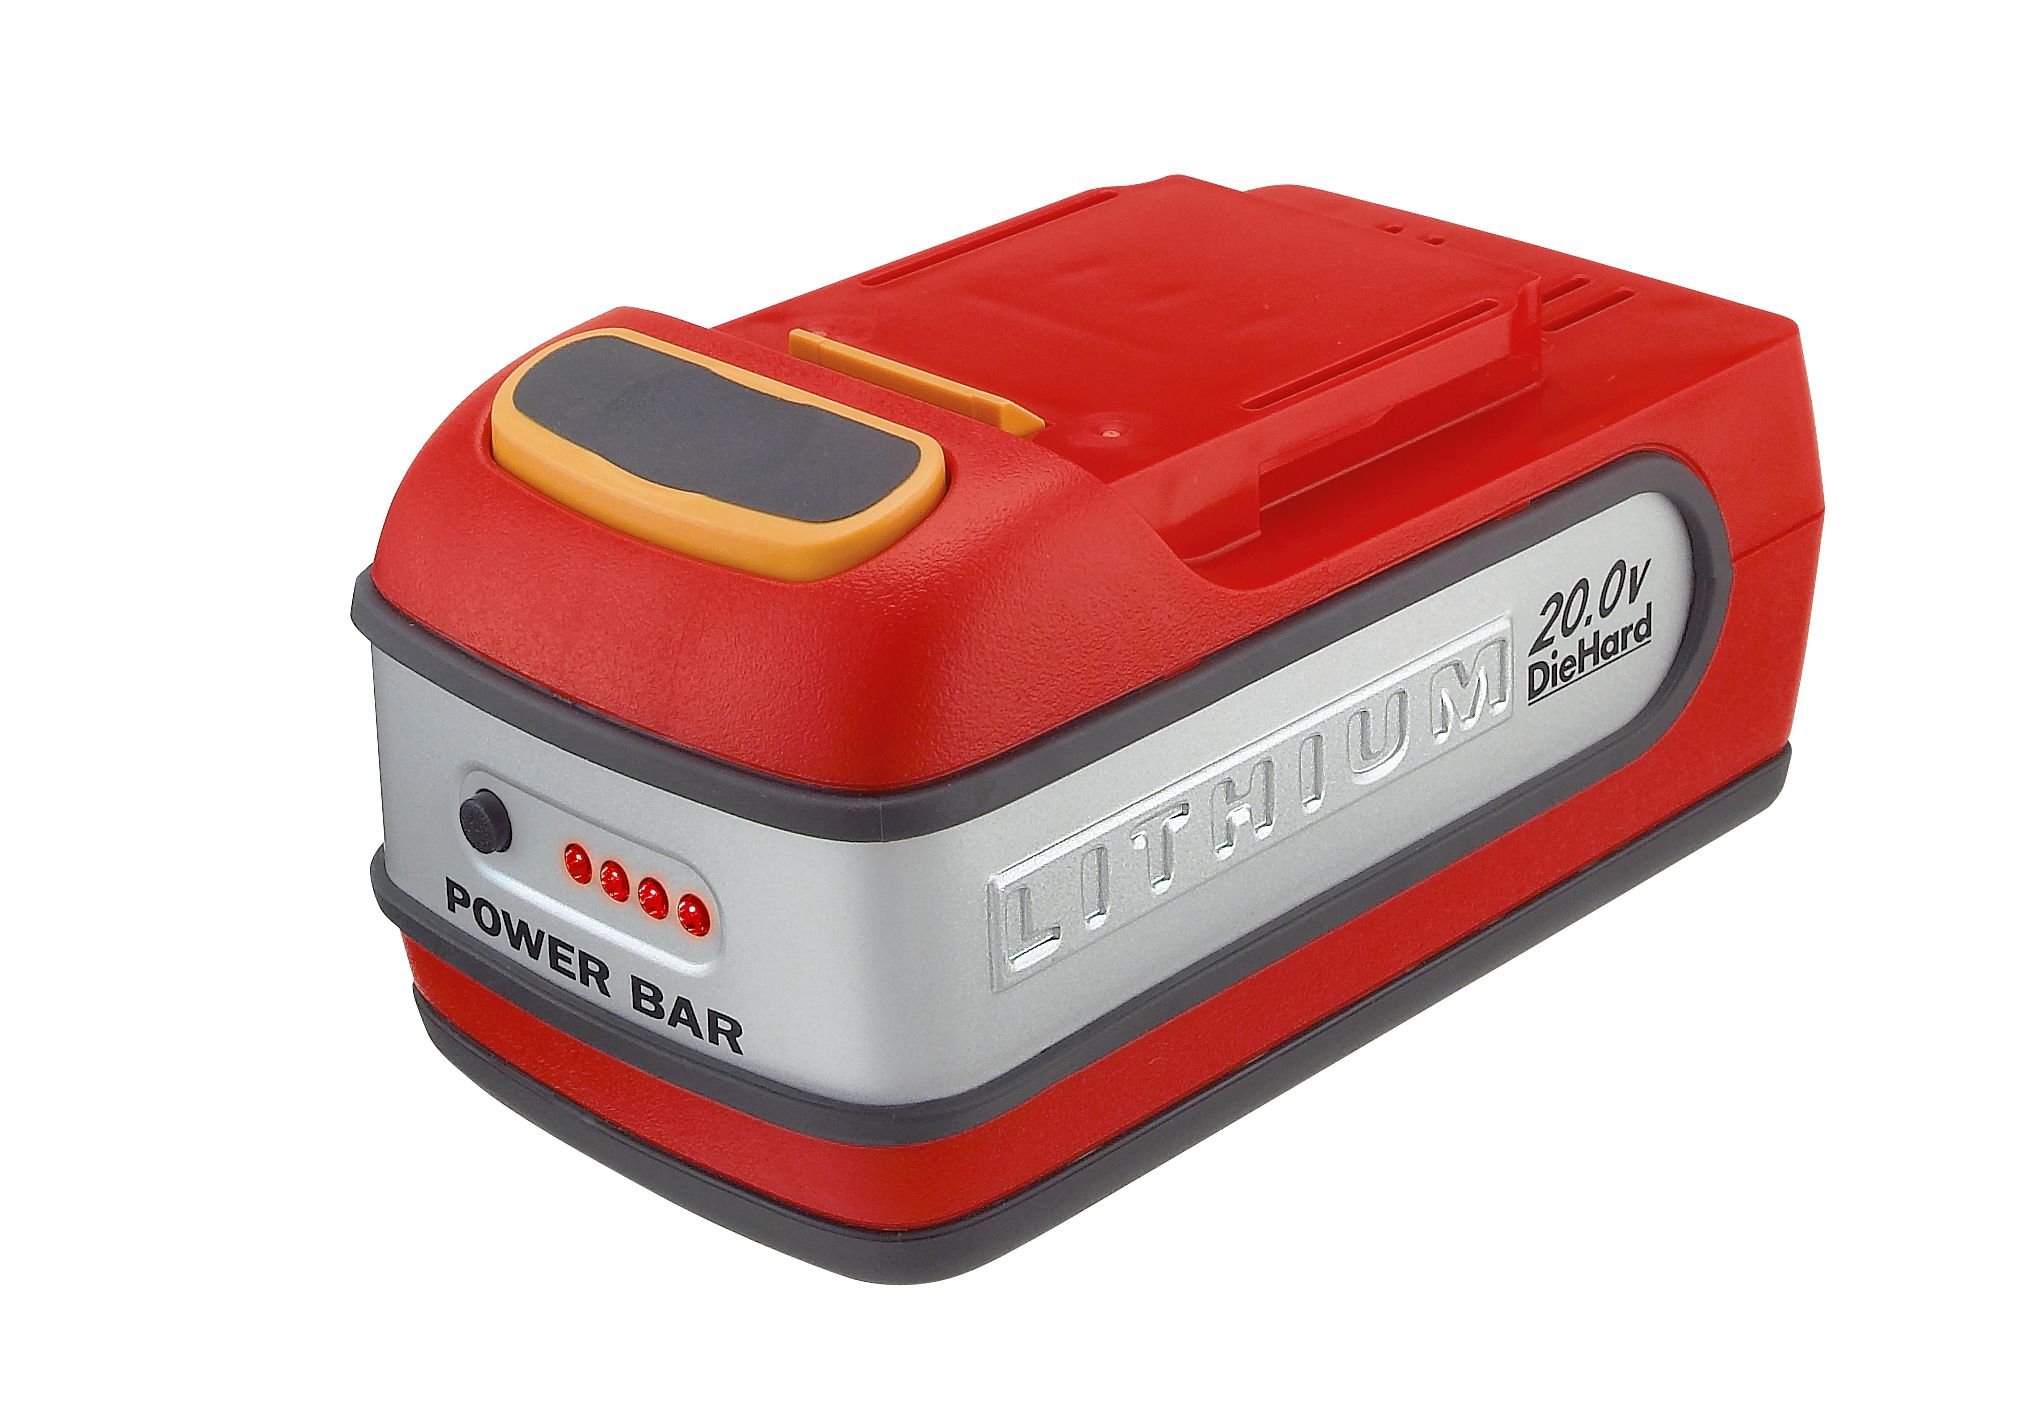 Craftsman - 25708 - 20 Volt Lithium-Ion Cordless Battery Pack Sears